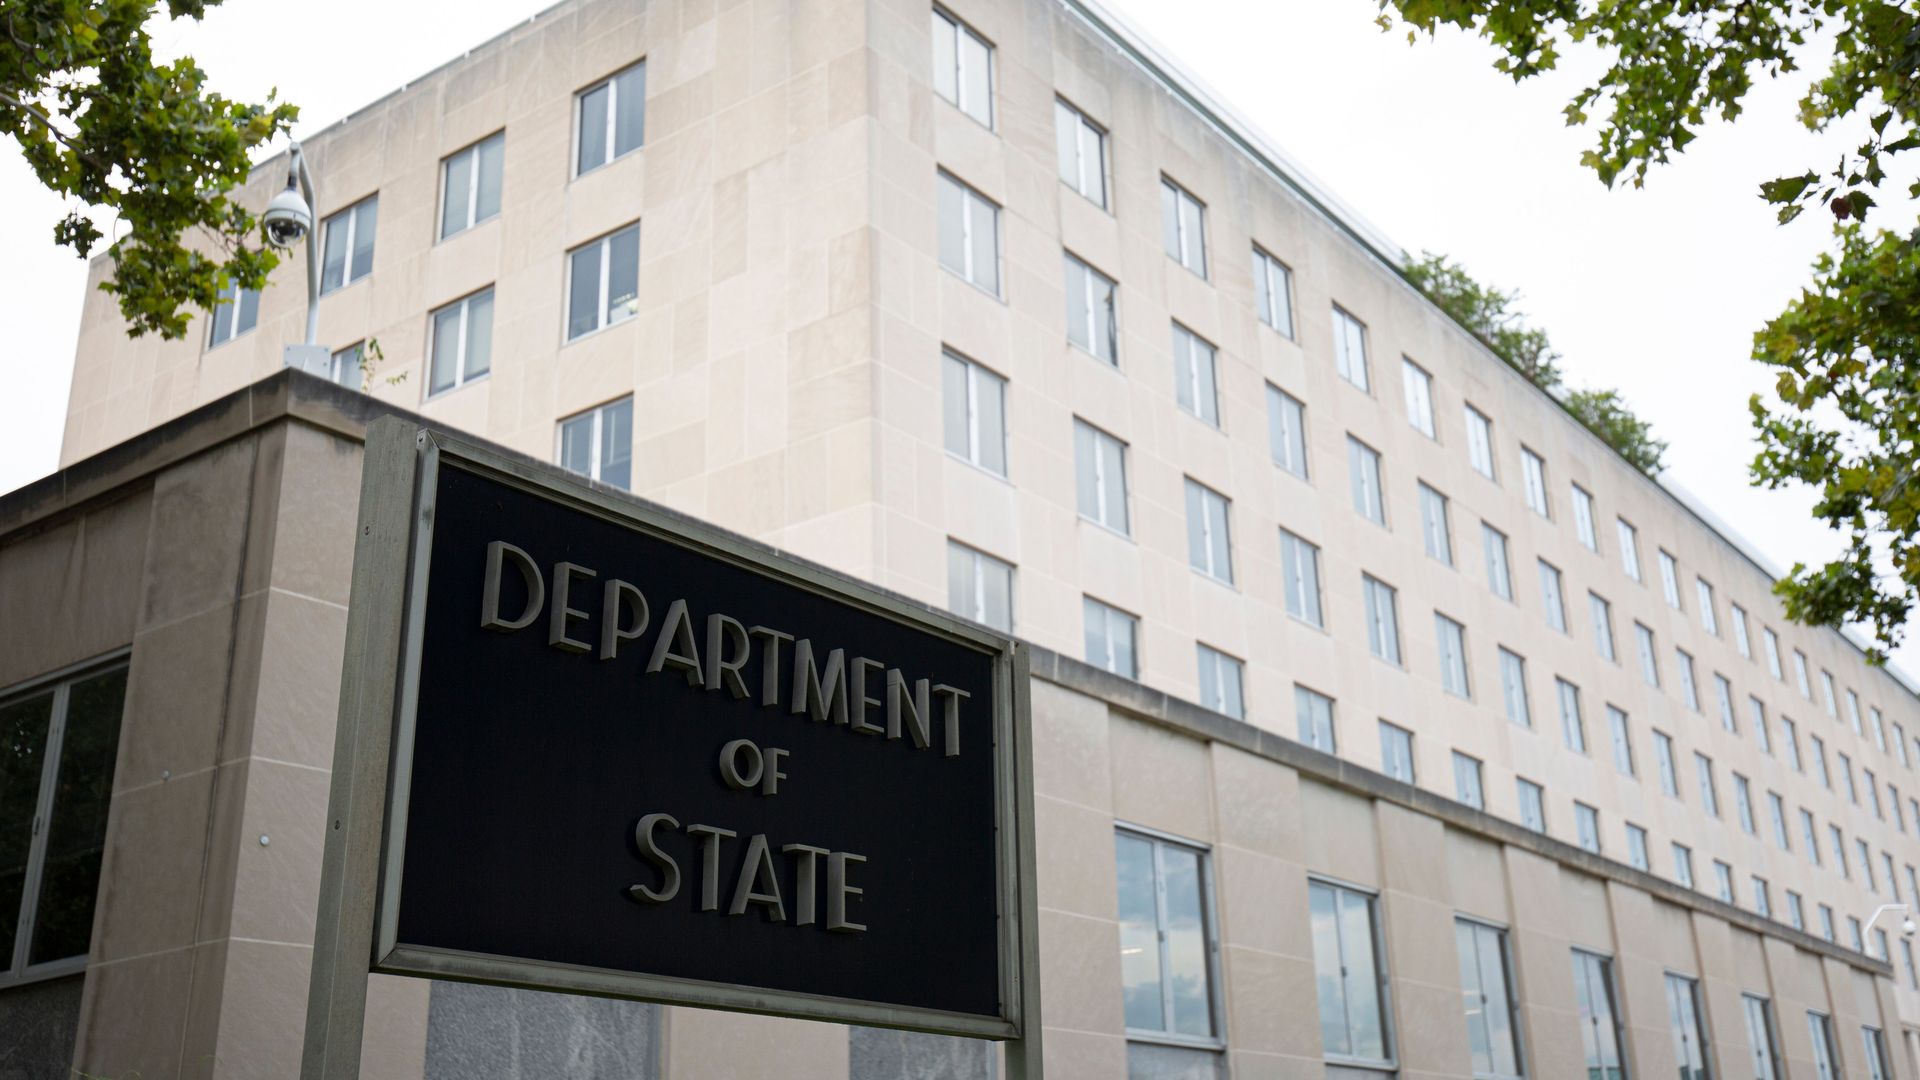 The state department building.